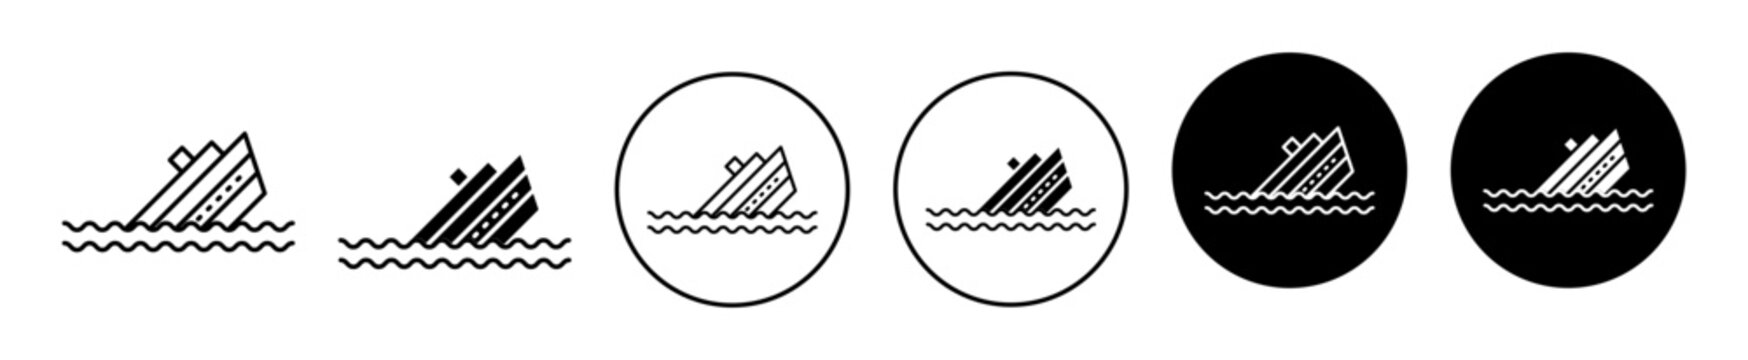 Sinking icon. cargo shipment collision disaster in ocean rescue of ship boat logo set. sea flood accident and cruise ship sinking in sea water symbol. catastrophe marine ship boat sinking vector sign